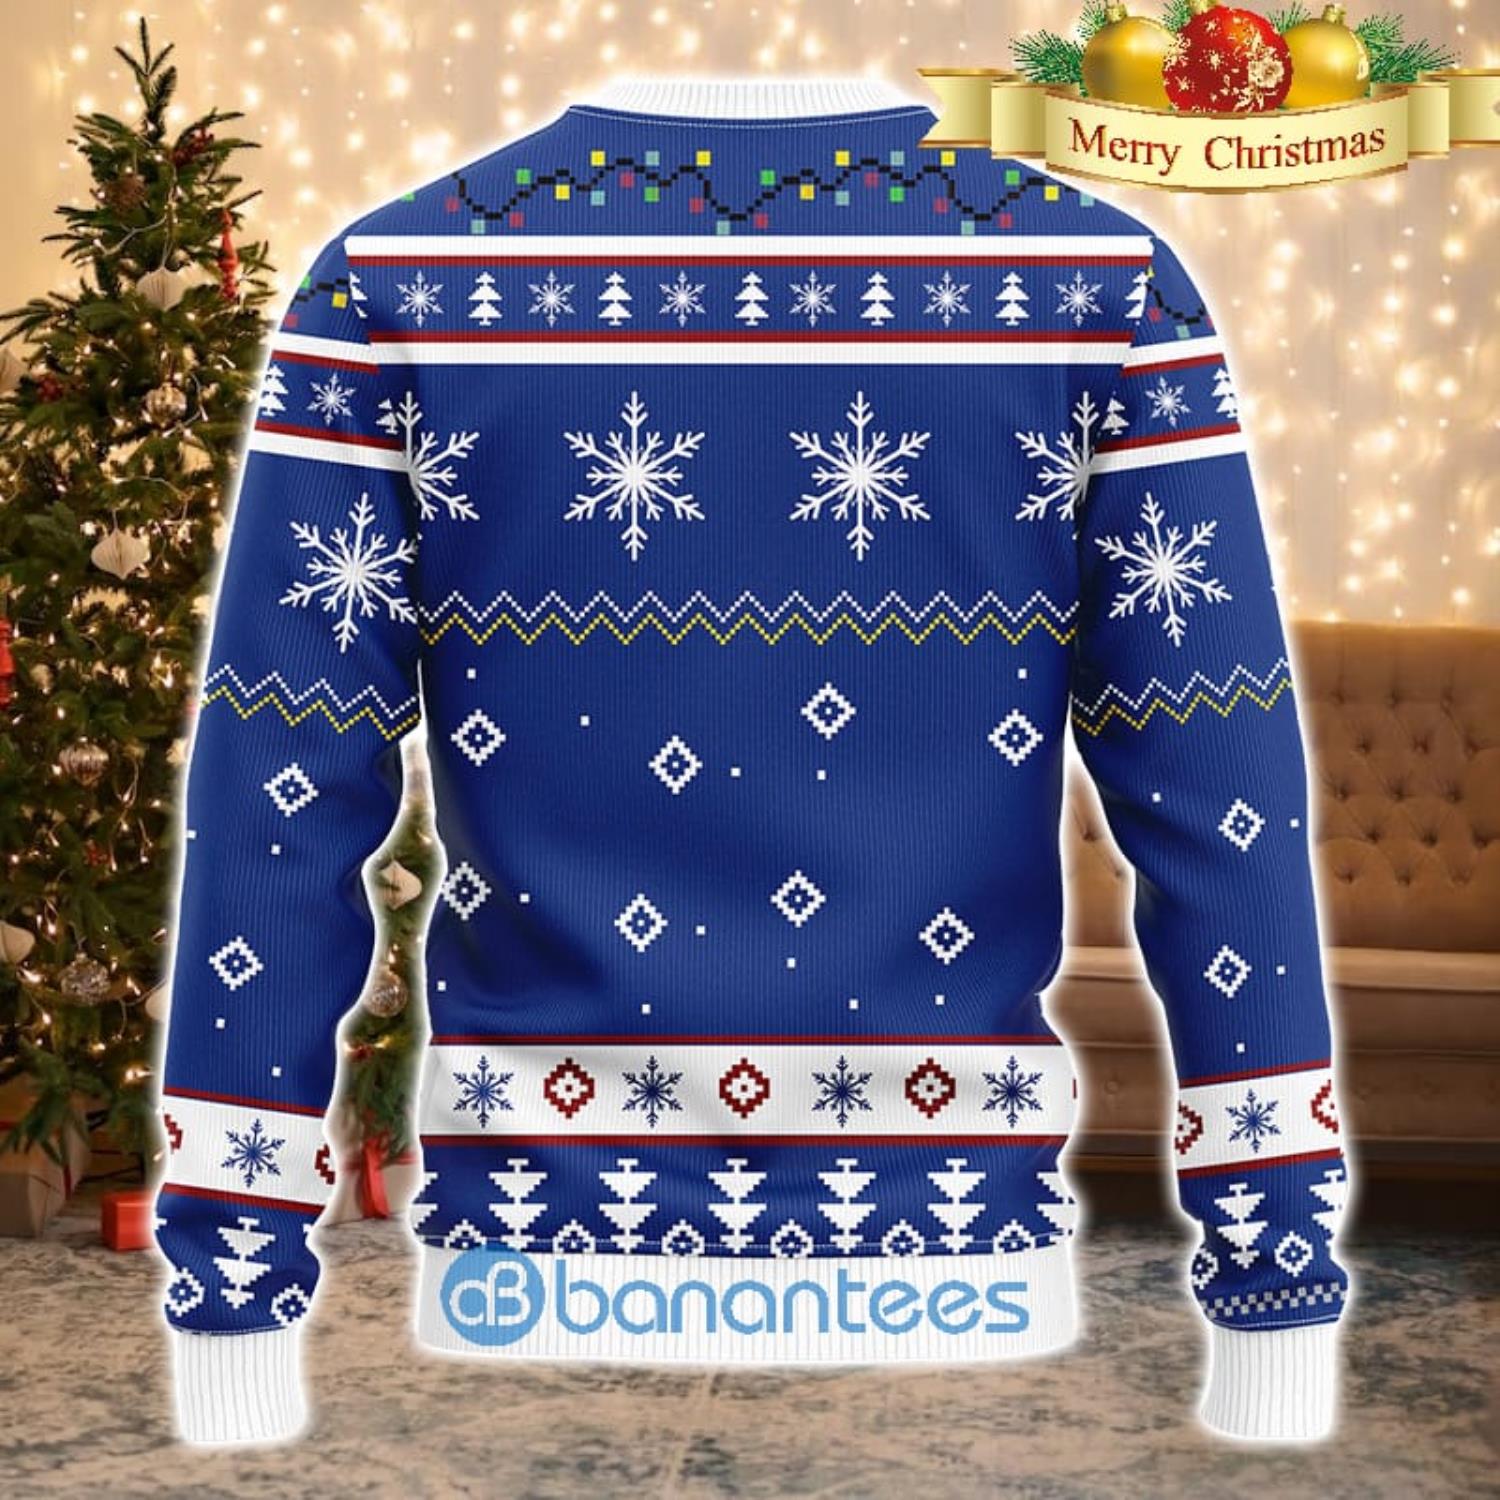 dodgers sweater for men